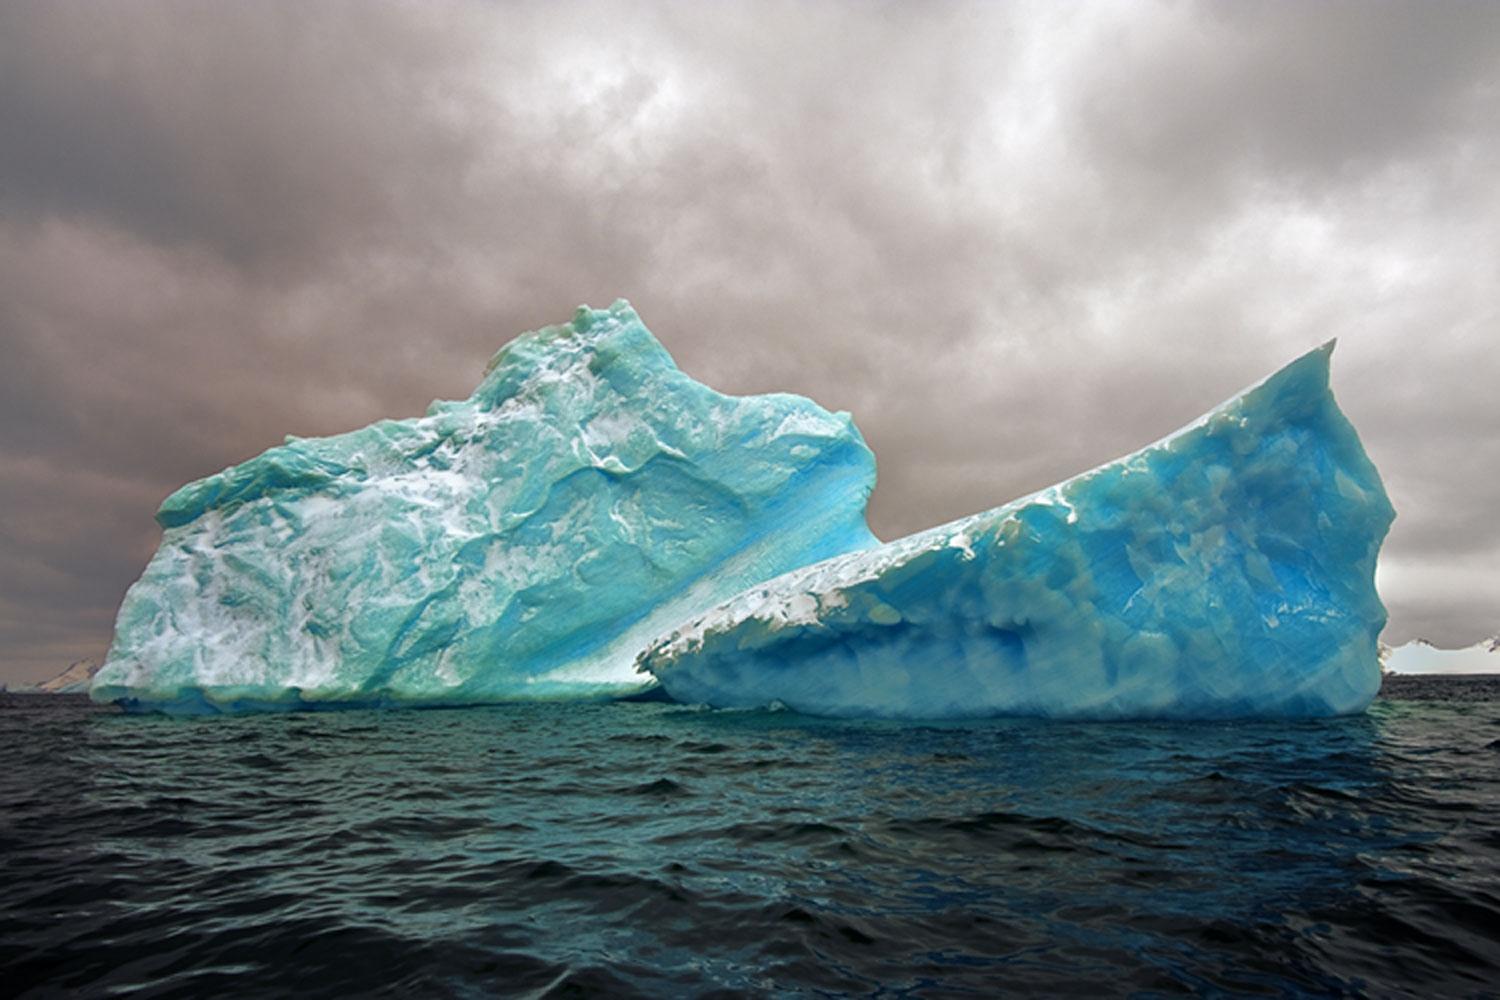 Antarctica #98 is a limited edition photograph taken by John Conn in 2010.  It is a 20x30 image, printed on 24x36 archival paper and framed in a white frame.  It features two Icebergs.   It was printed in 2019.

John Conn got his start as a Marine